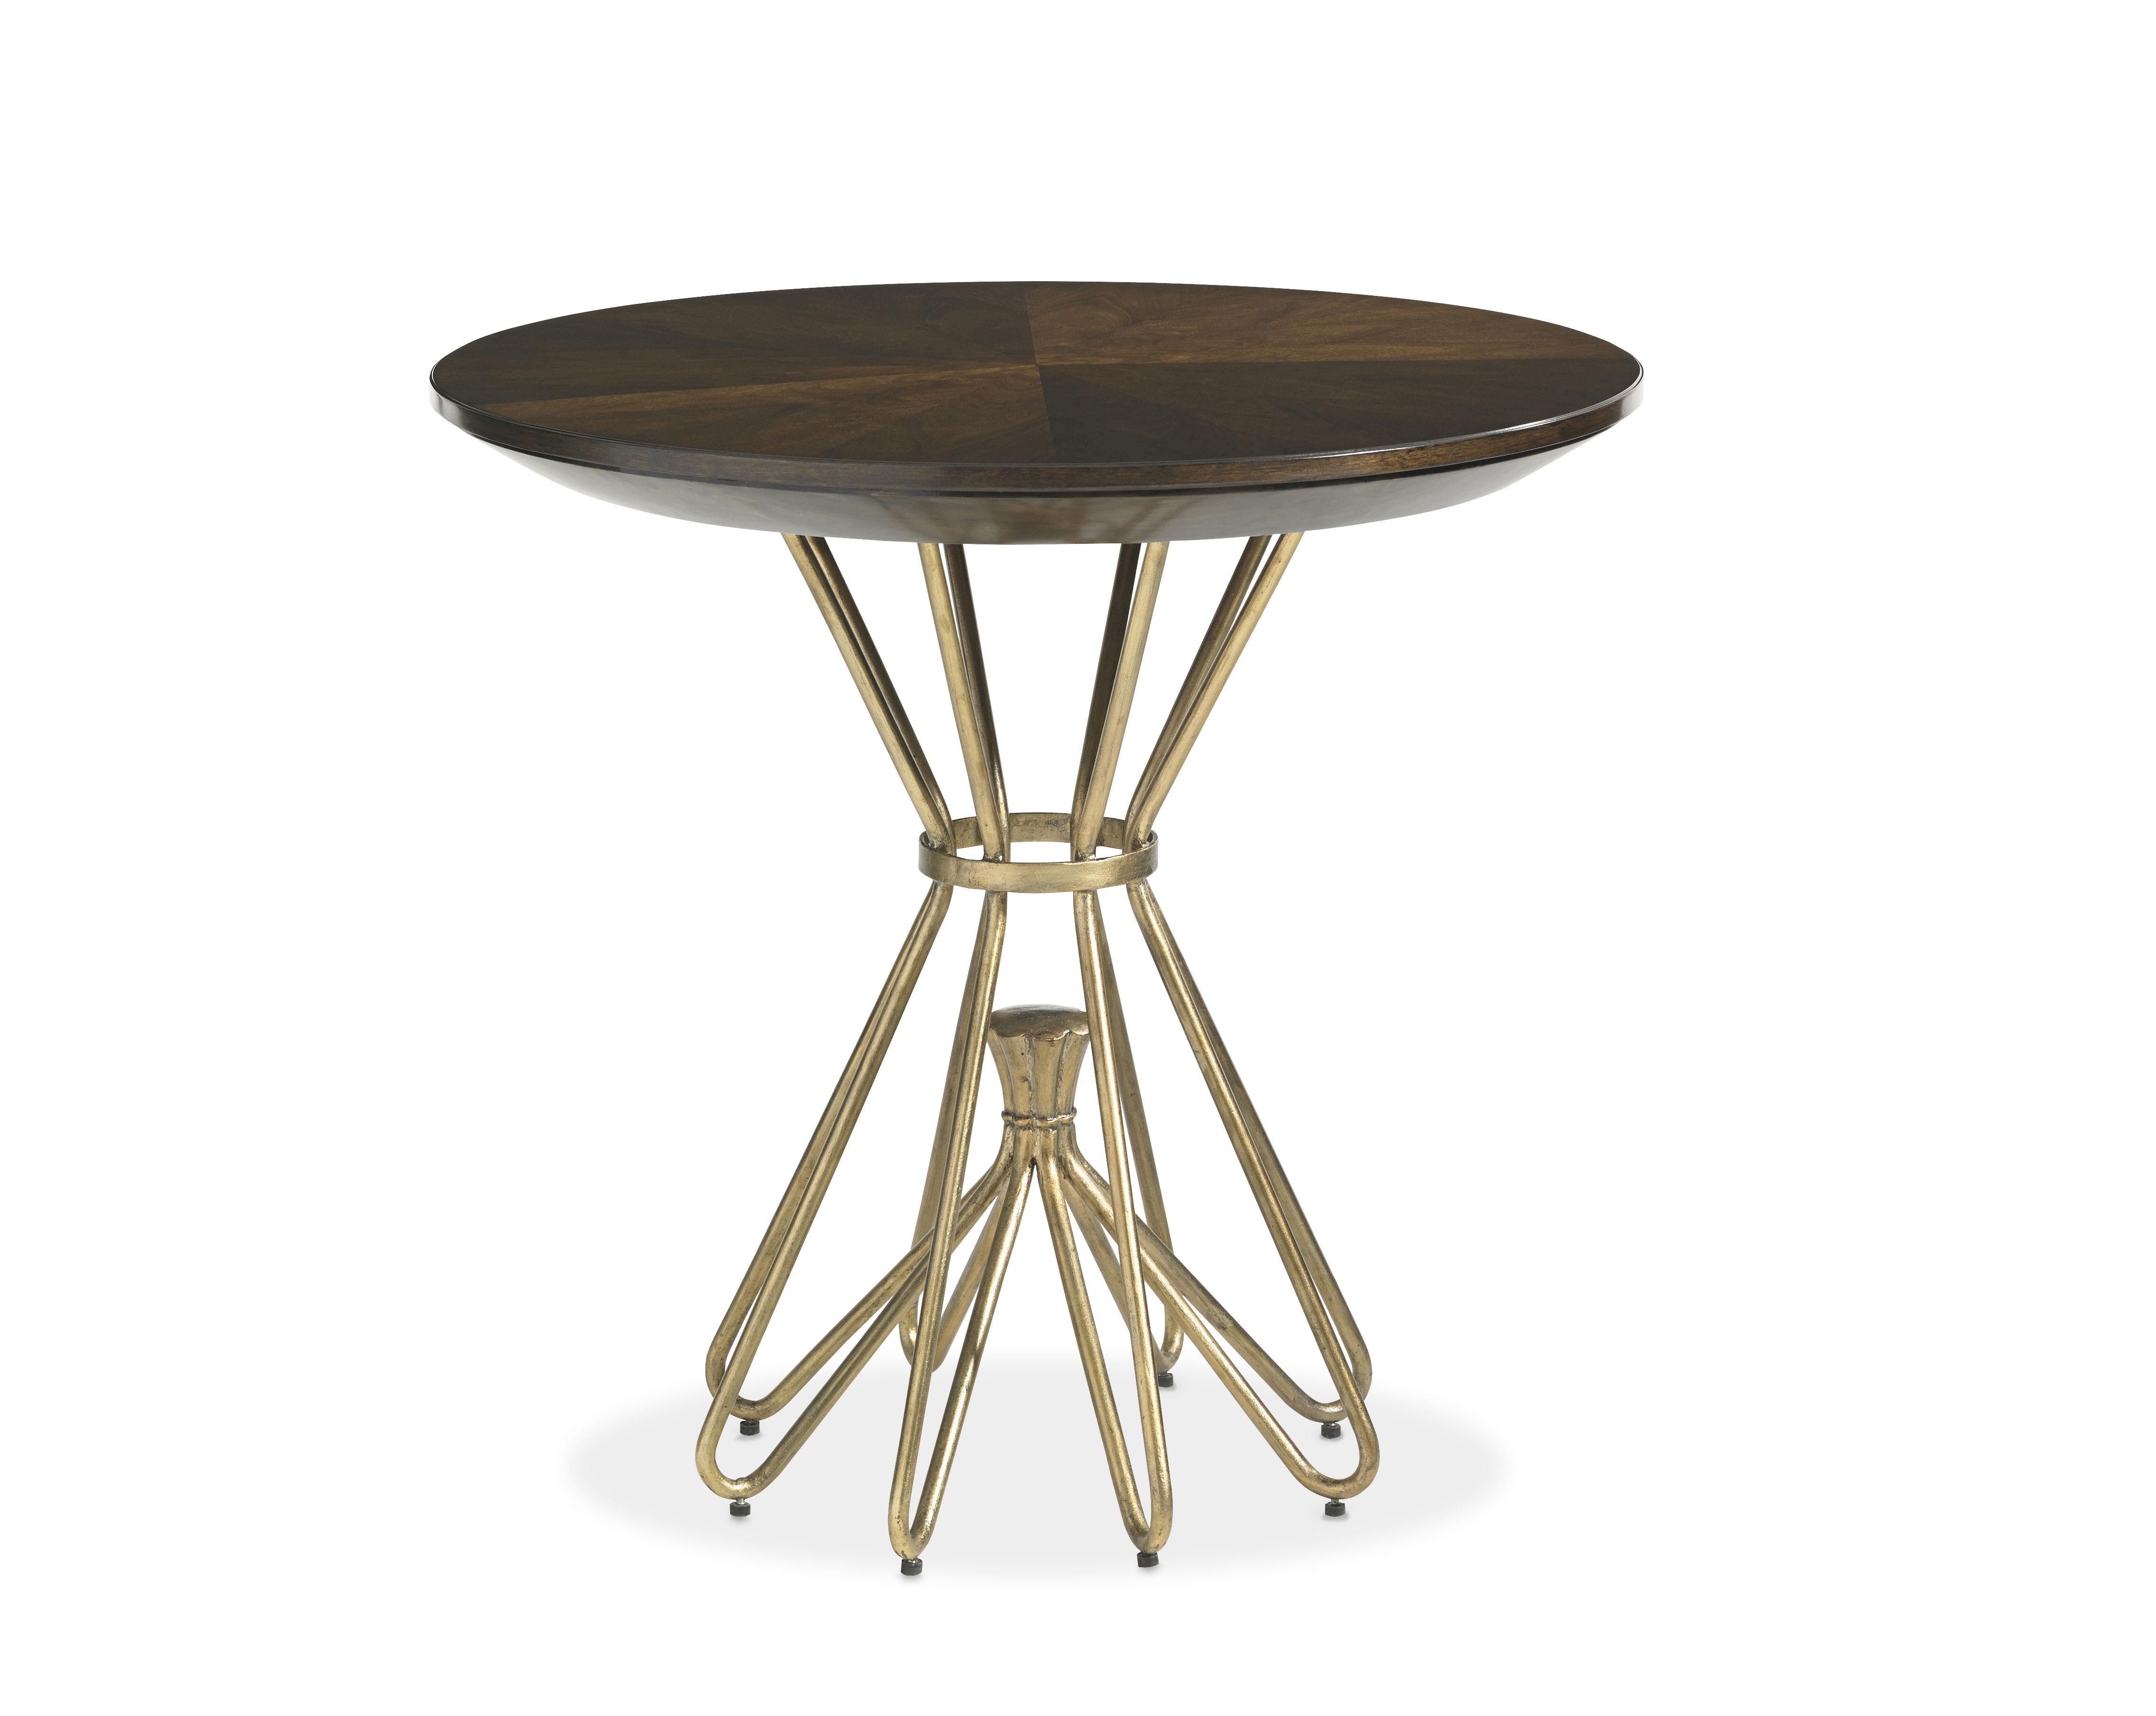 milo round lamp table living room side accent tables stanley unique outdoor furniture robb stucky tall hairpin legs ashley end gray wood coffee glass wine rack inexpensive wedding